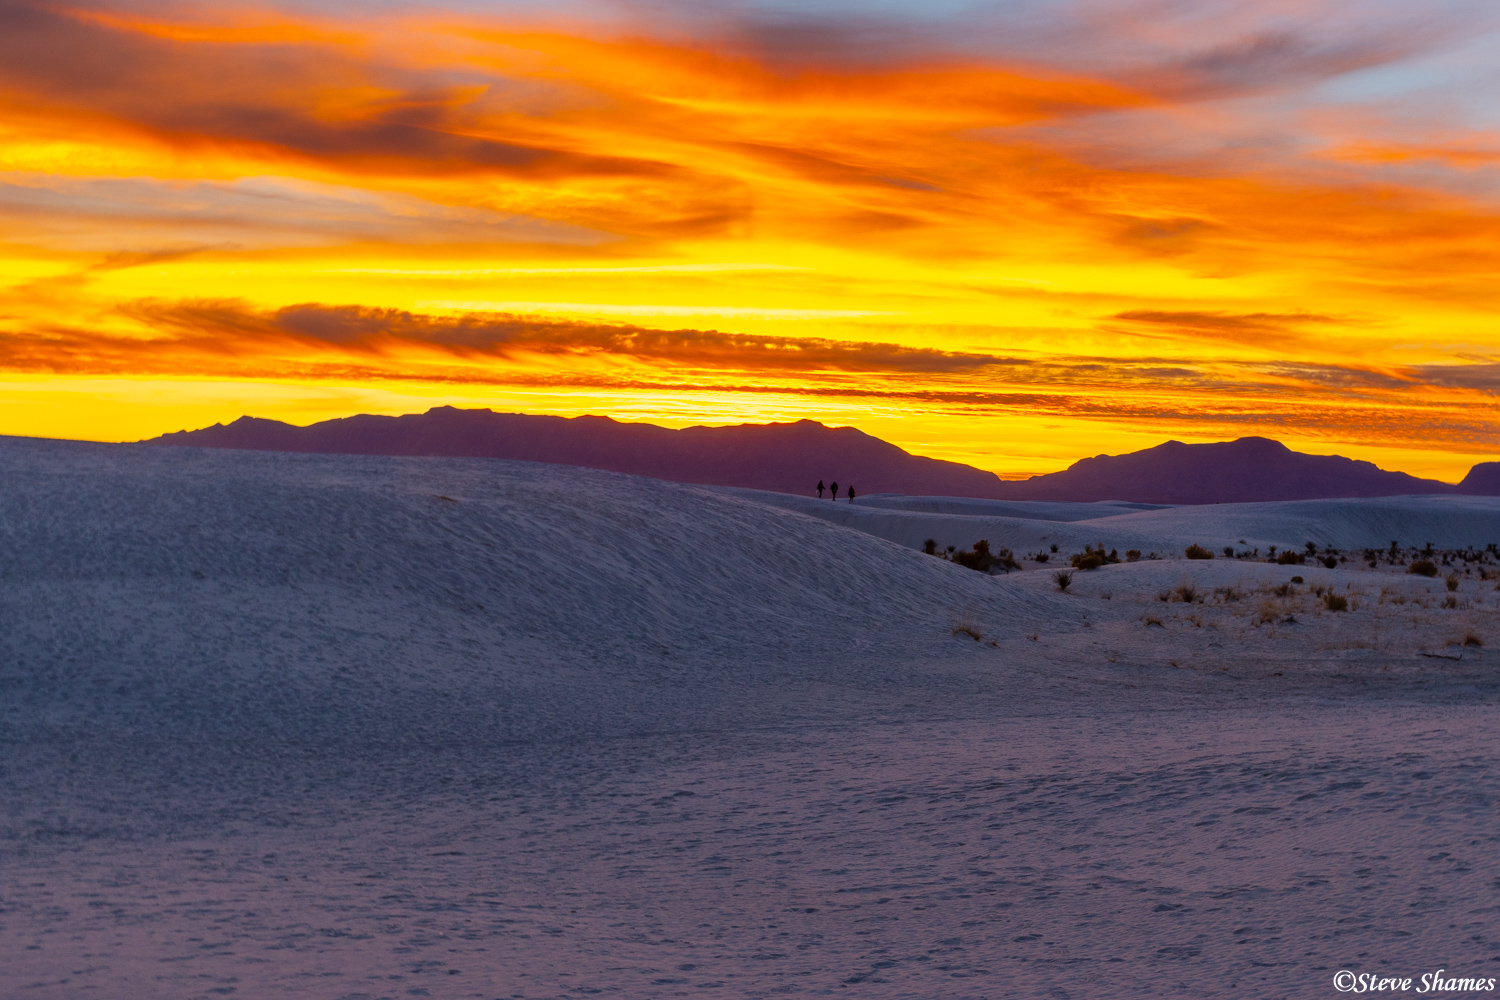 A few minutes after actual sunset at White Sands, the sky turned a very warm yellow-orange hue.